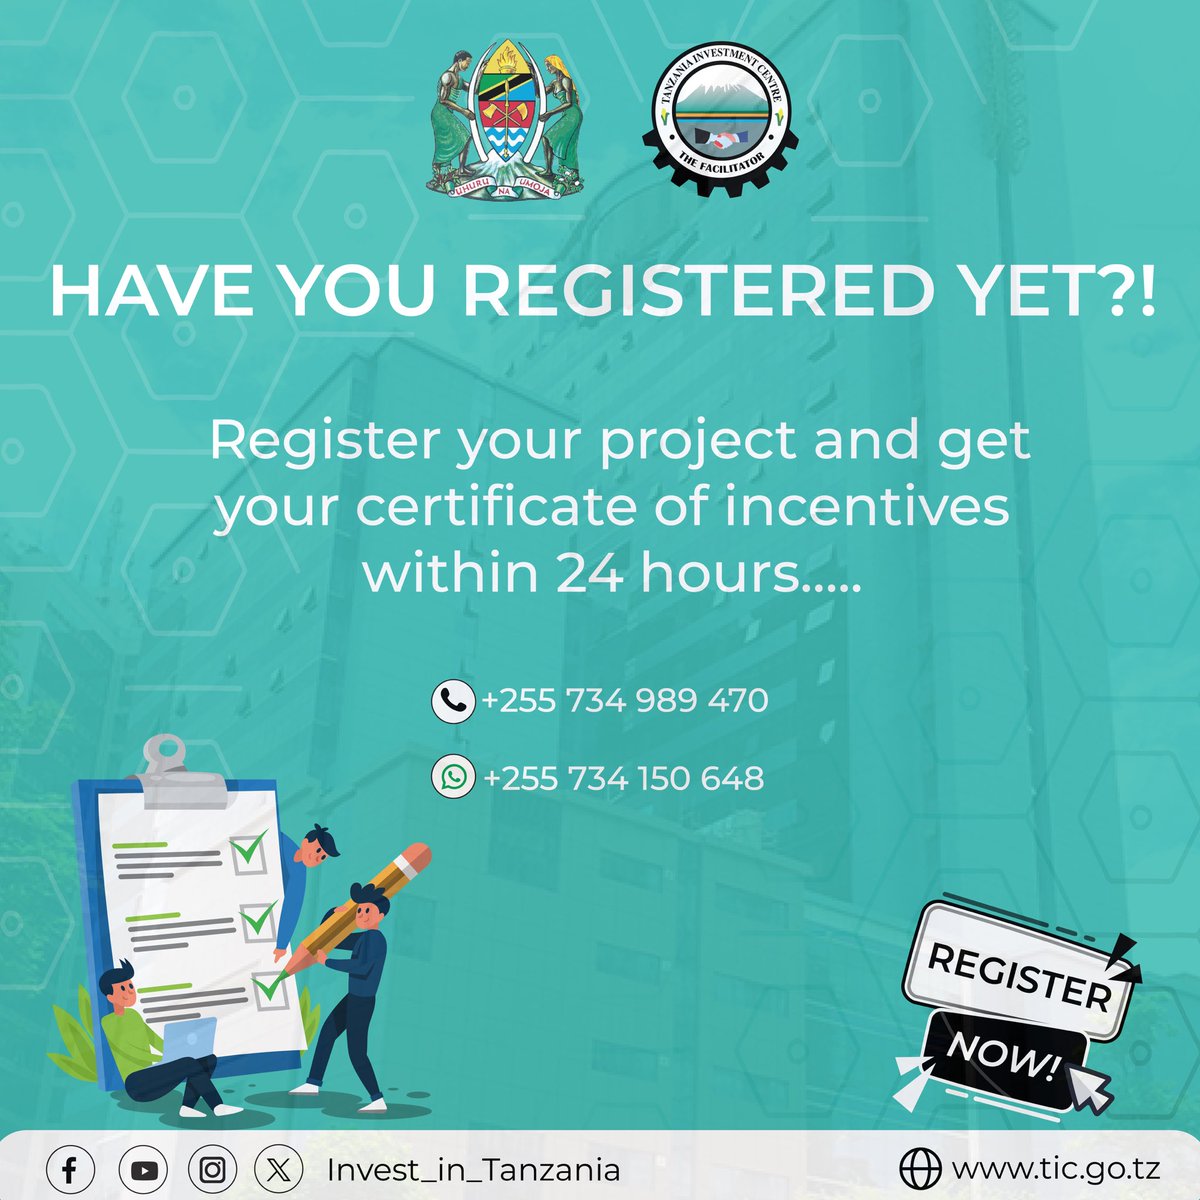 Time's ticking! 

Don't miss out on incentives for your project. 

Register now!